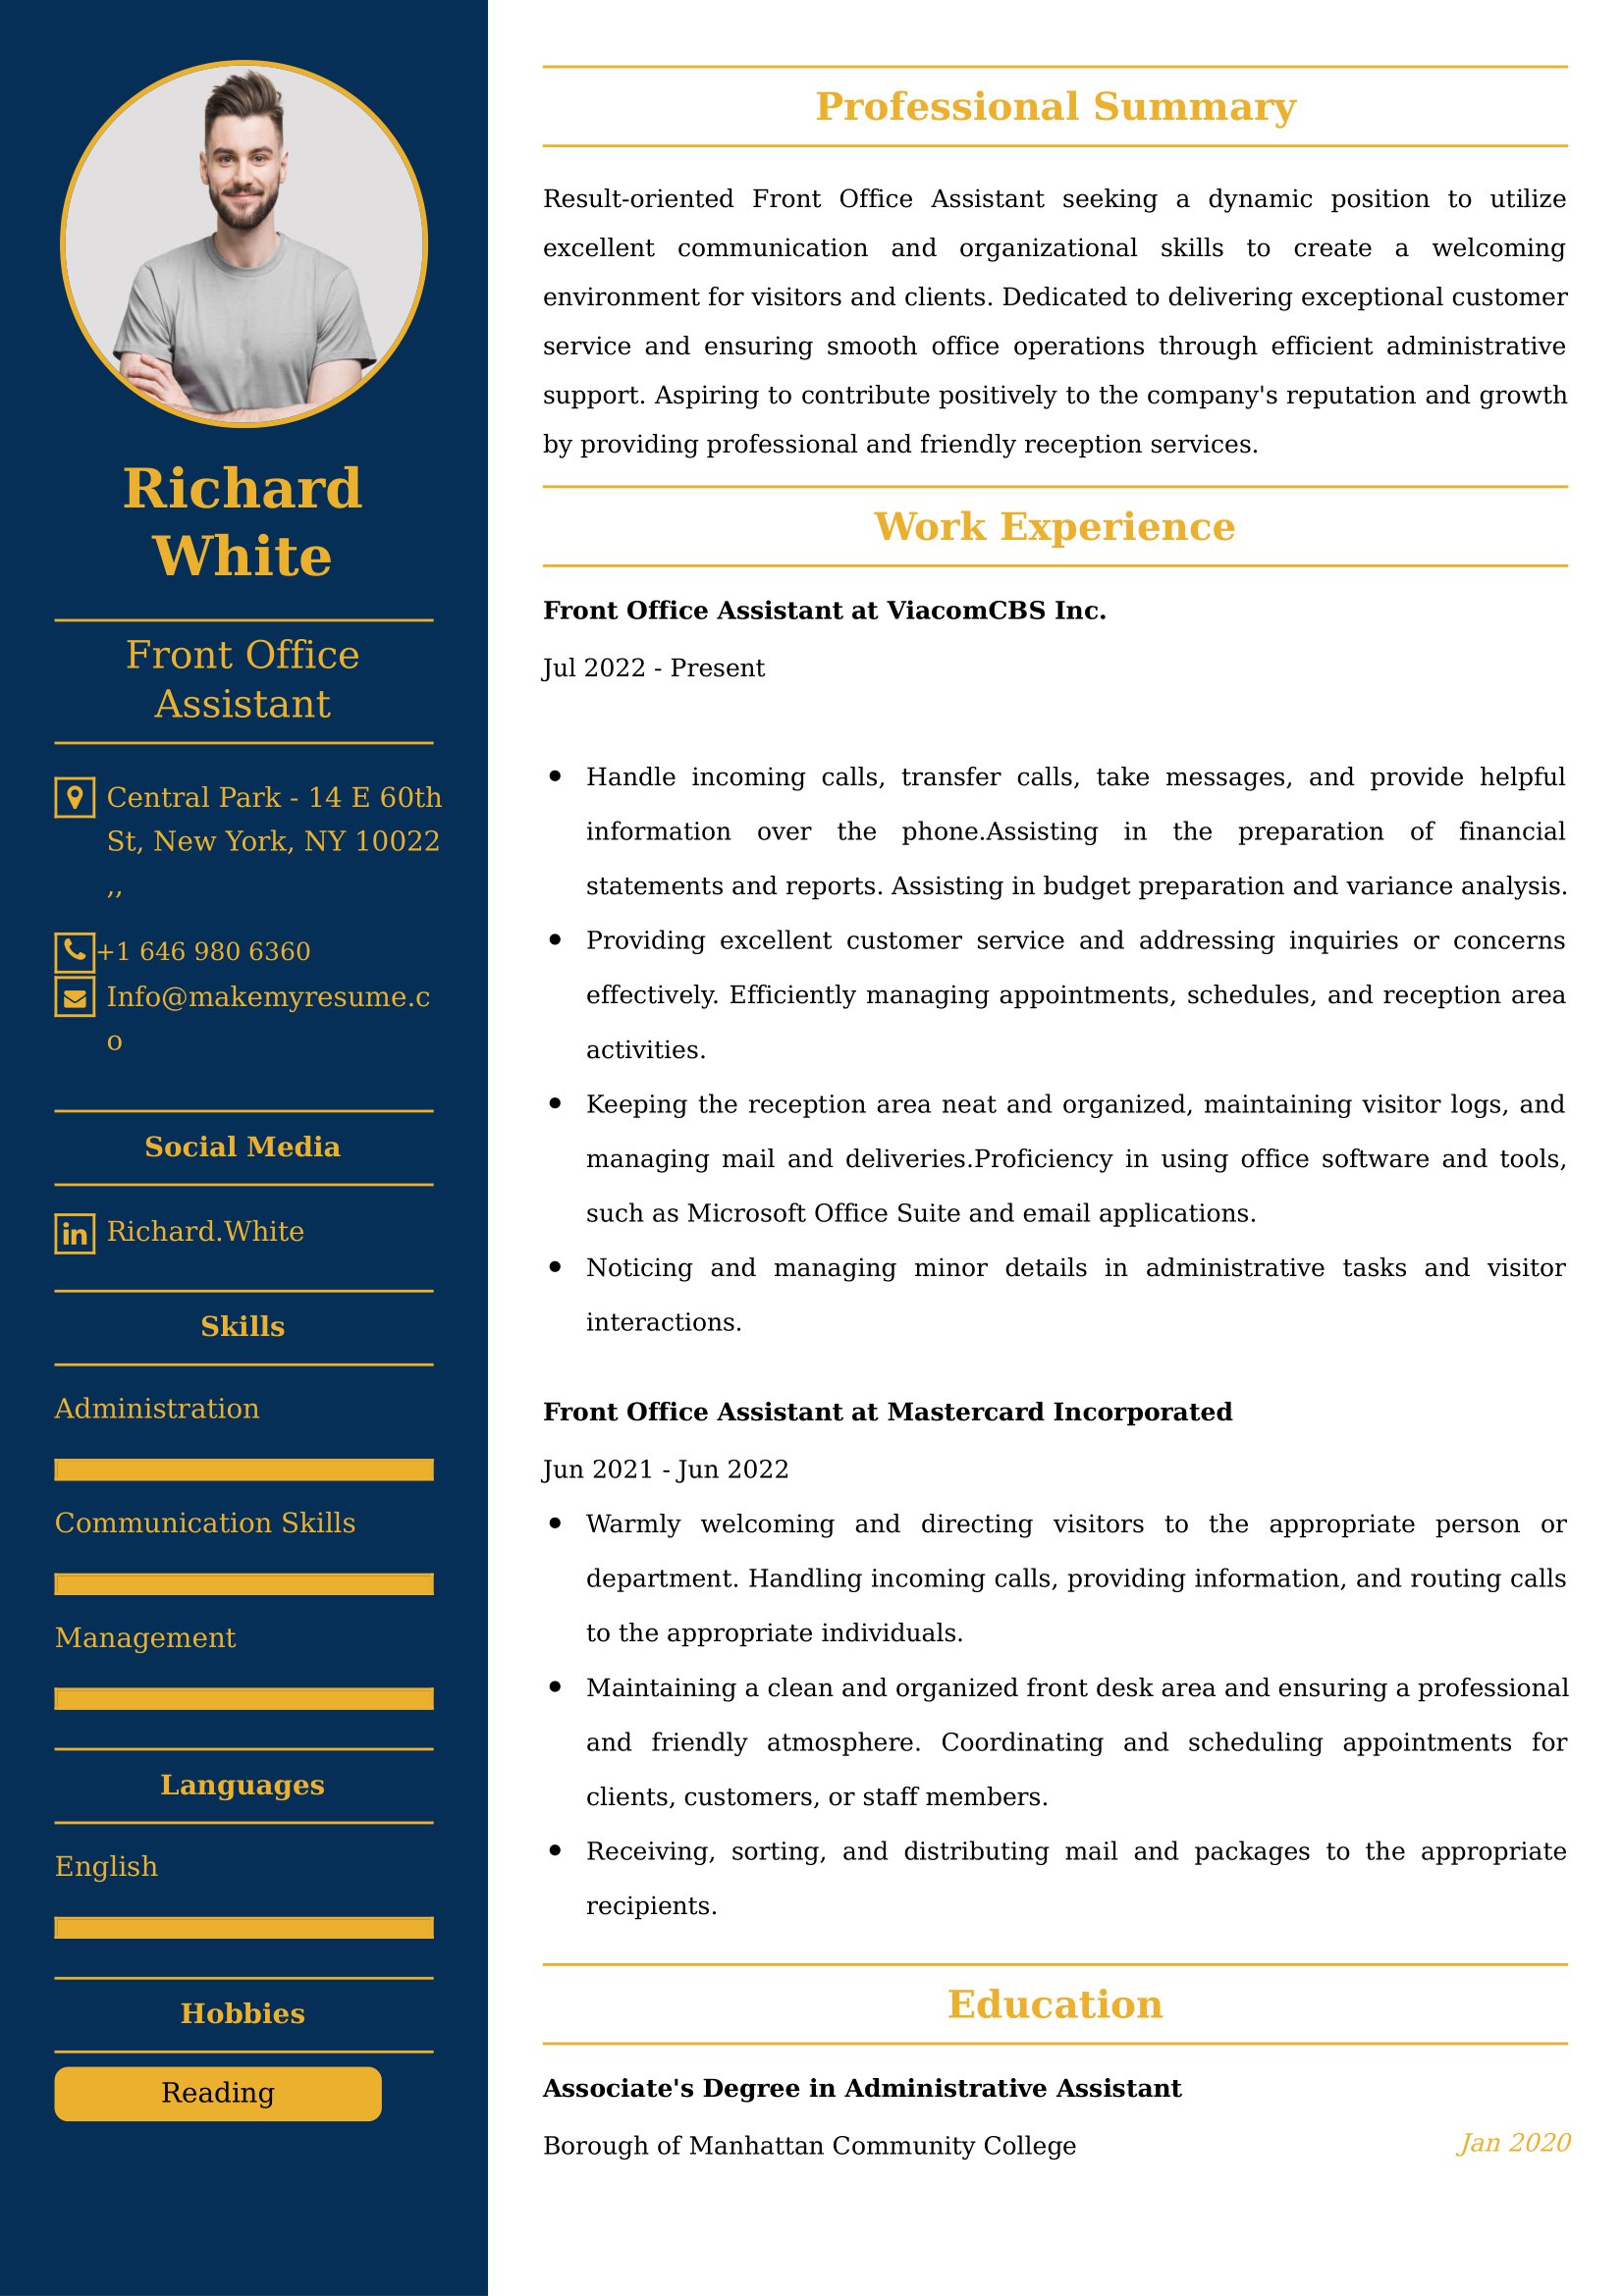 Front Office Assistant Resume Examples for UK Jobs - Tips and Guide